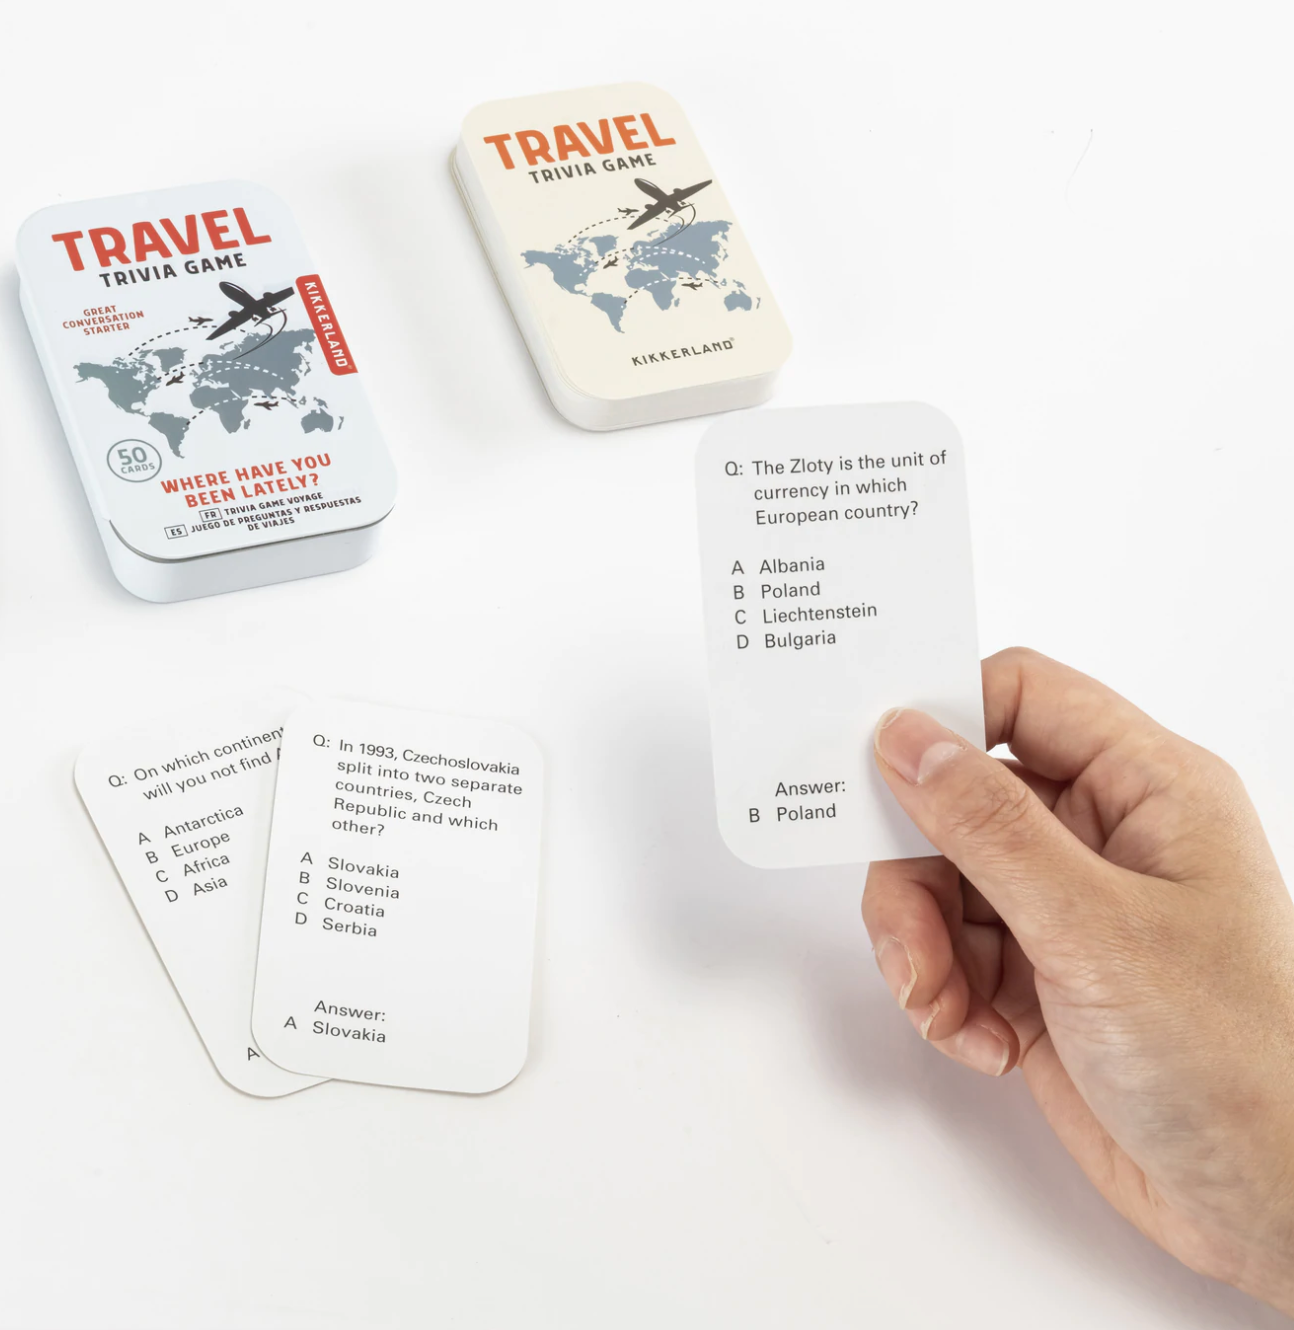 TRAVEL TRIVIA GAME Where Have You Been